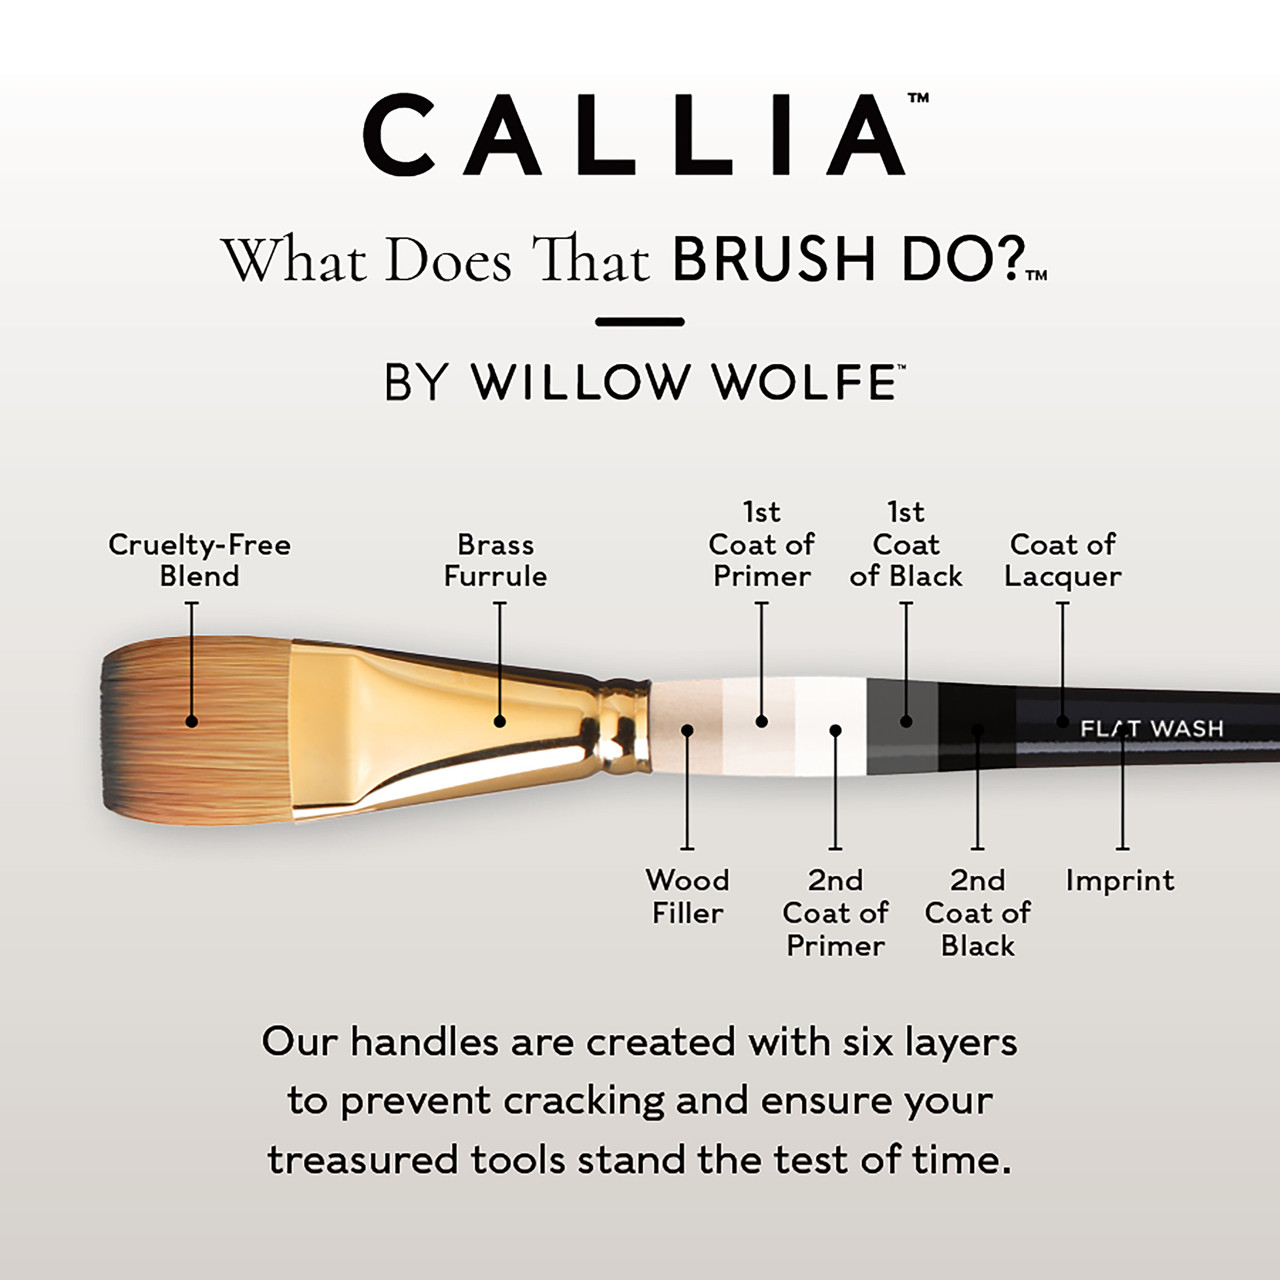 Callia Filbert Paint Brush, Synthetic Kolinsky Sable by Willow Wolfe